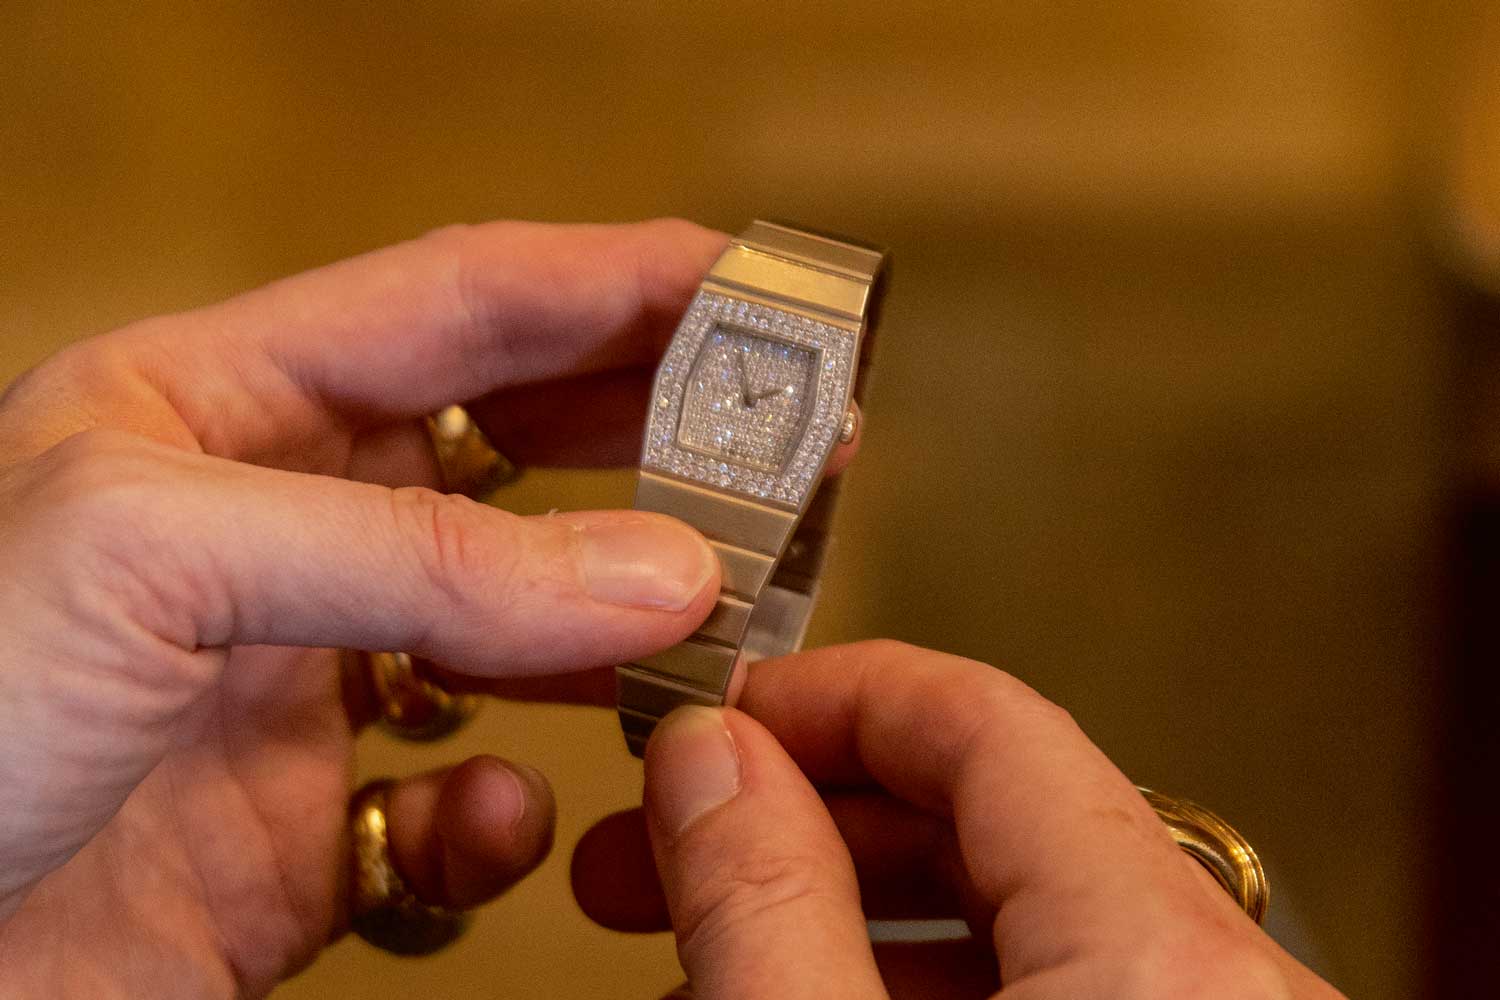 Smaller versions were made for women as well, like this Queen Midas with paved diamond dial and bezel (©Revolution)